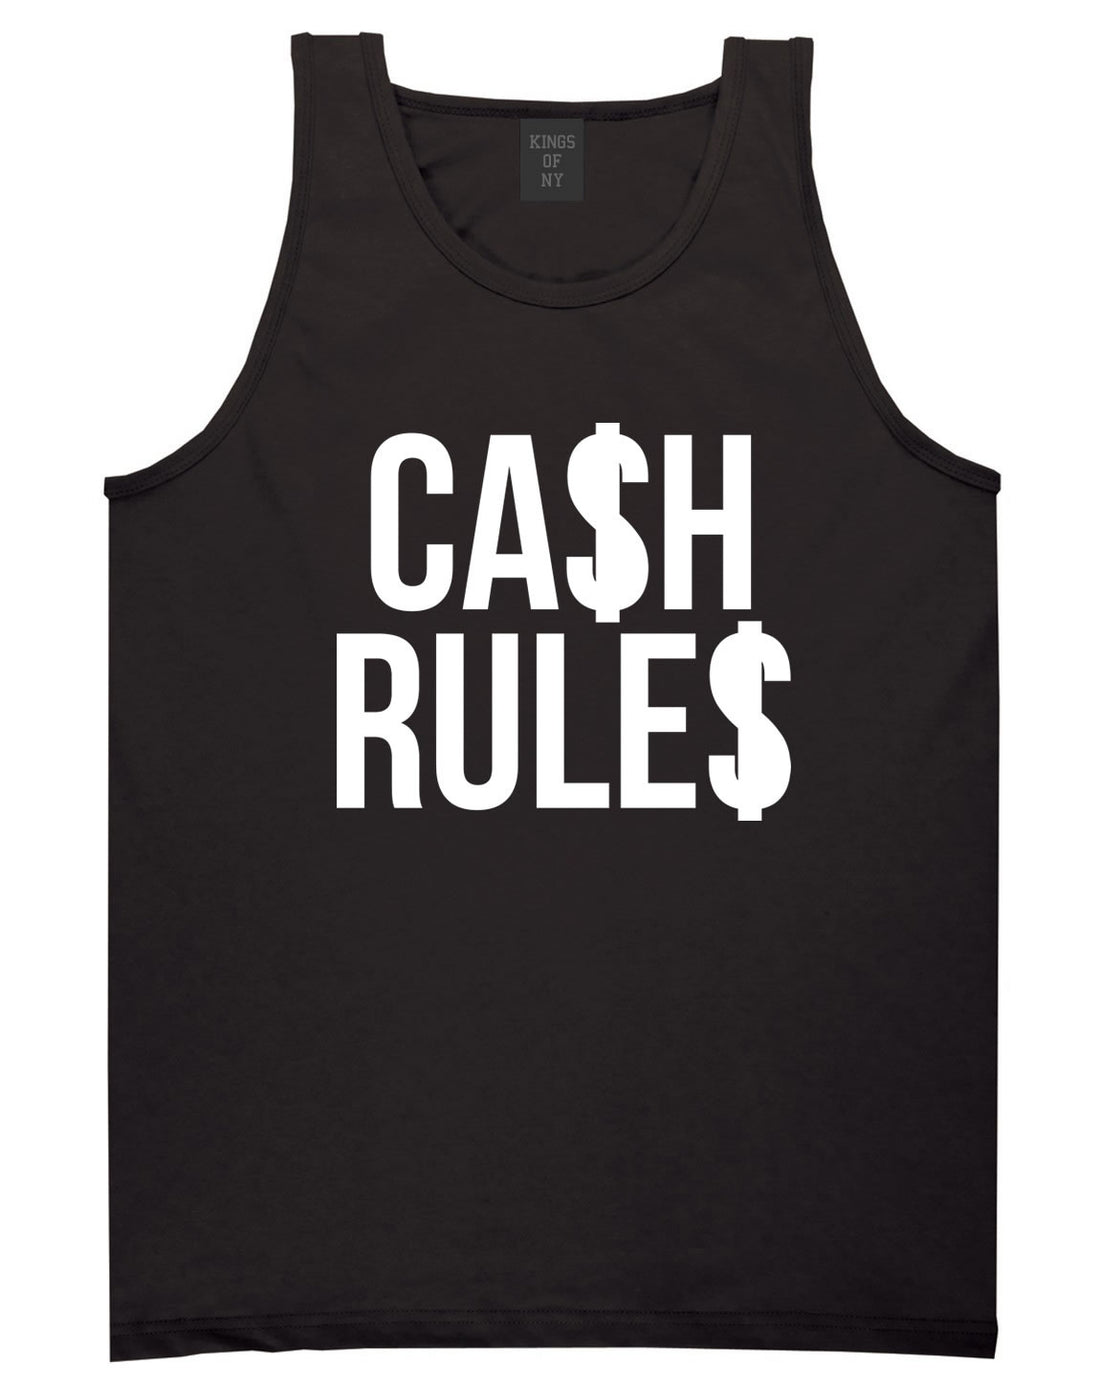 Cash Rules Tank Top in Black by Kings Of NY